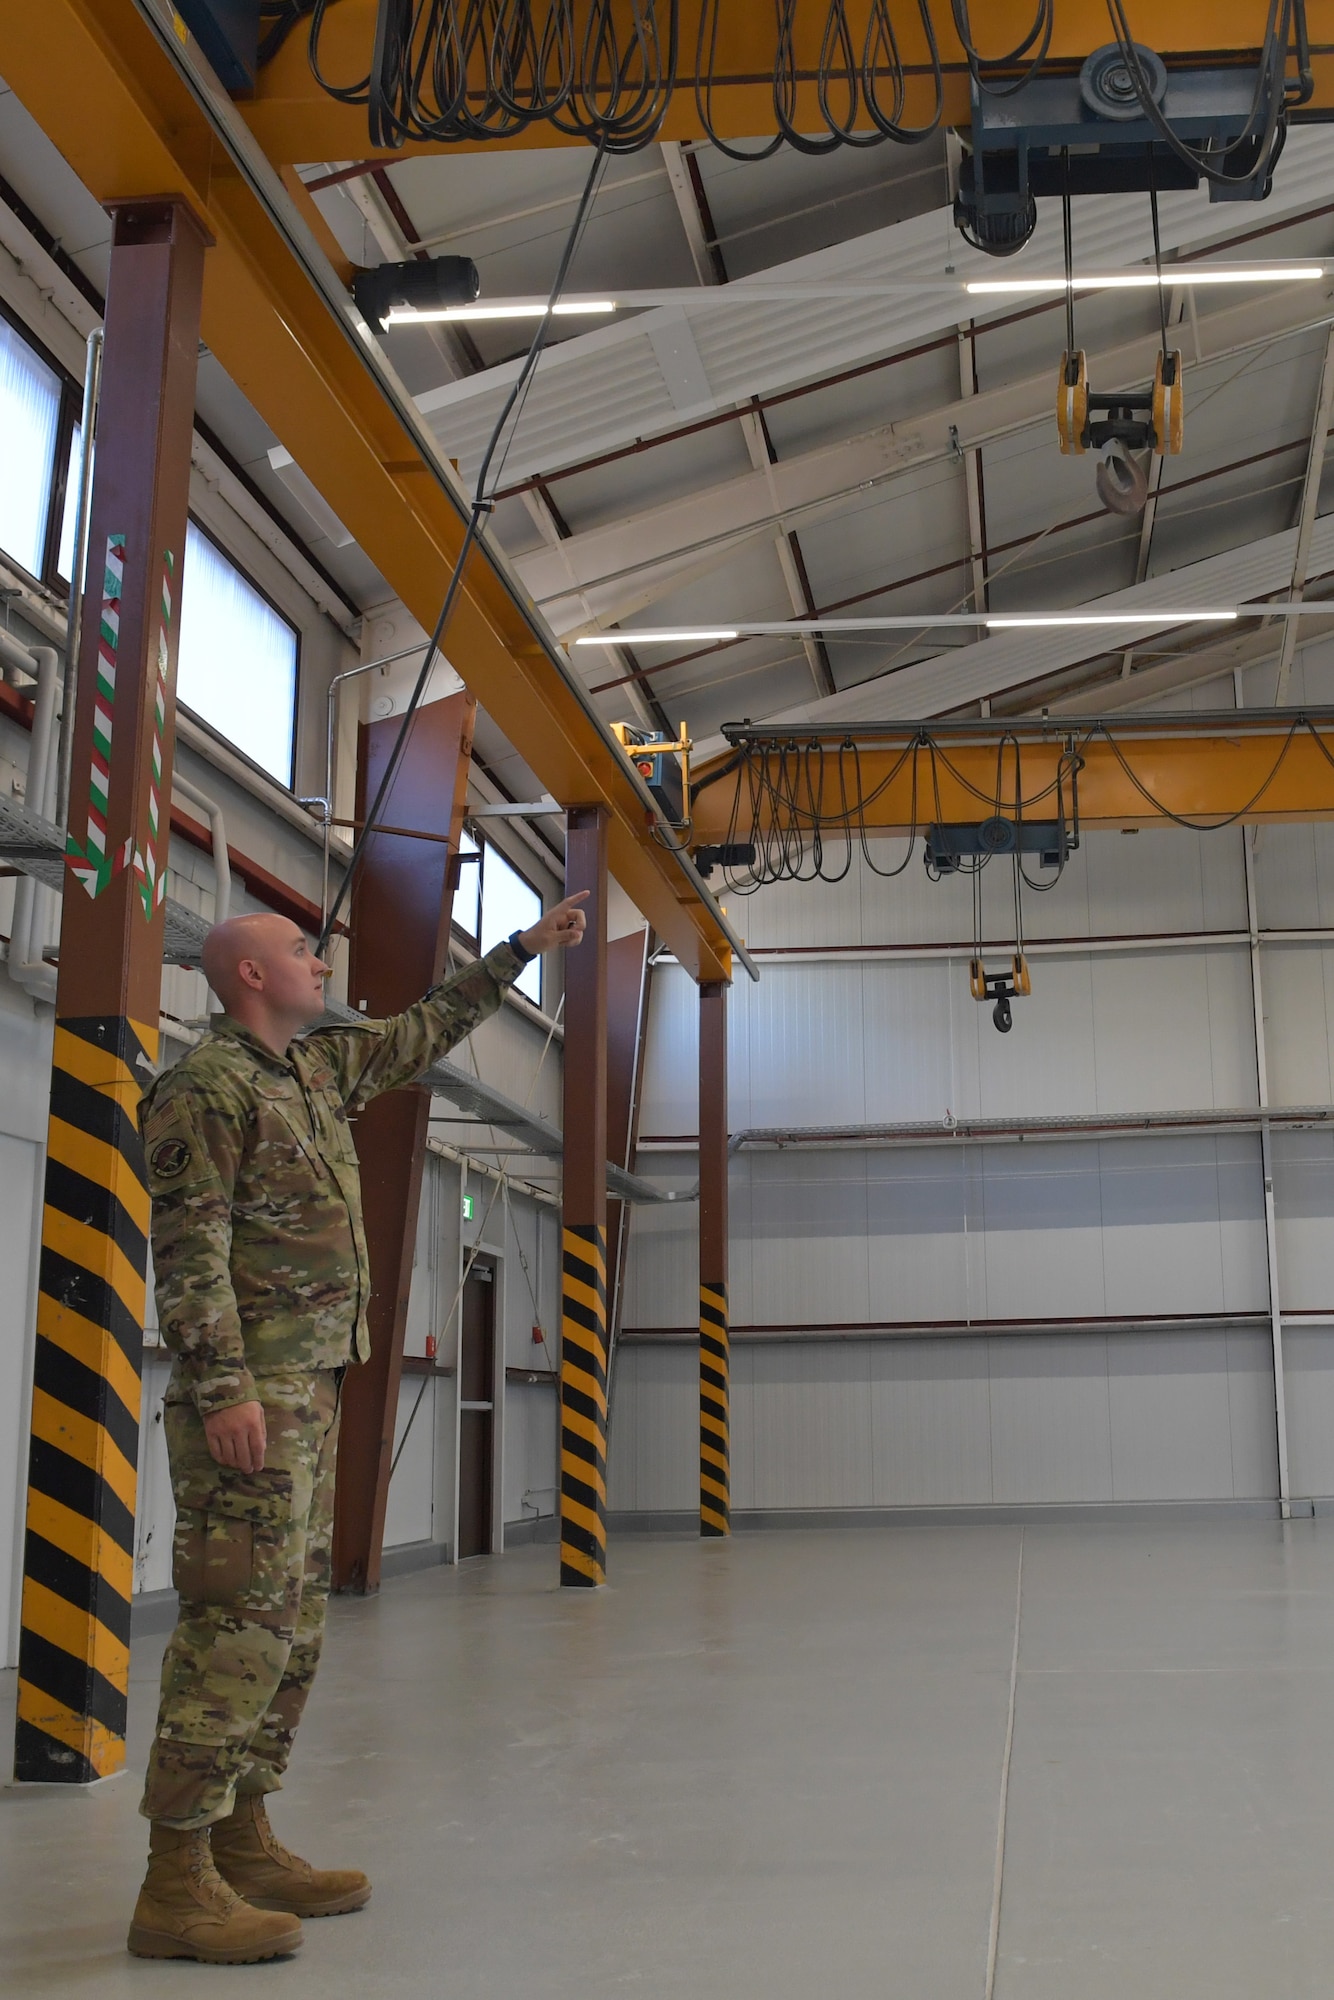 An Airman points to a hoist hanging in a maintenance facility.